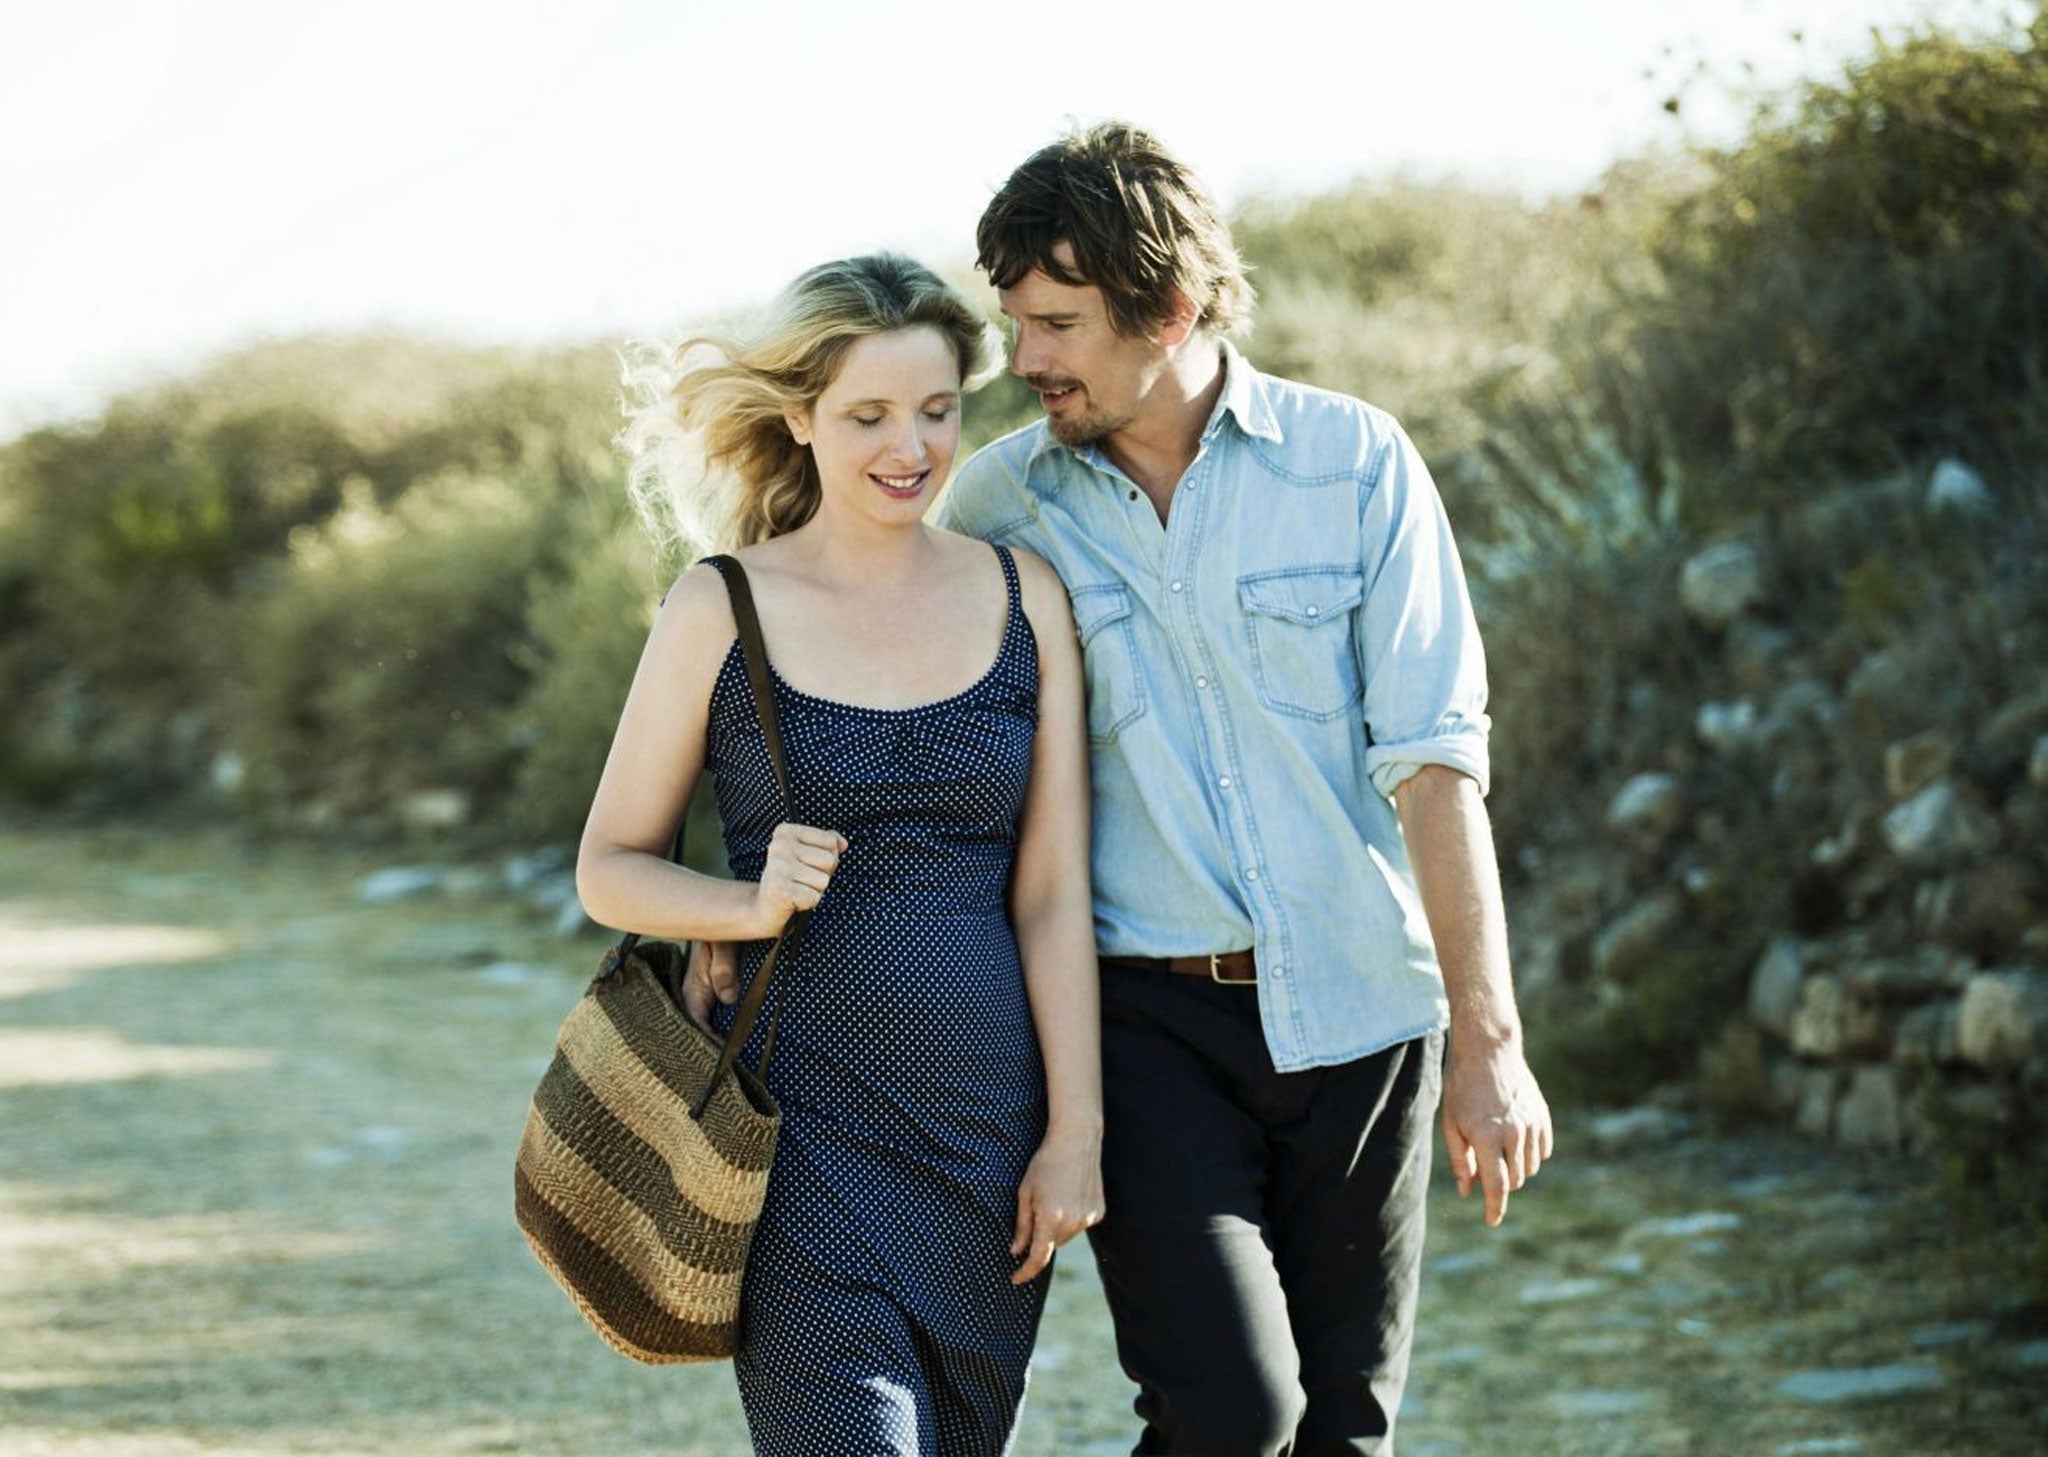 Walking and talking: Ethan Hawke and Julie Delpy star in Richard Linklater's drama 'Before Midnight'